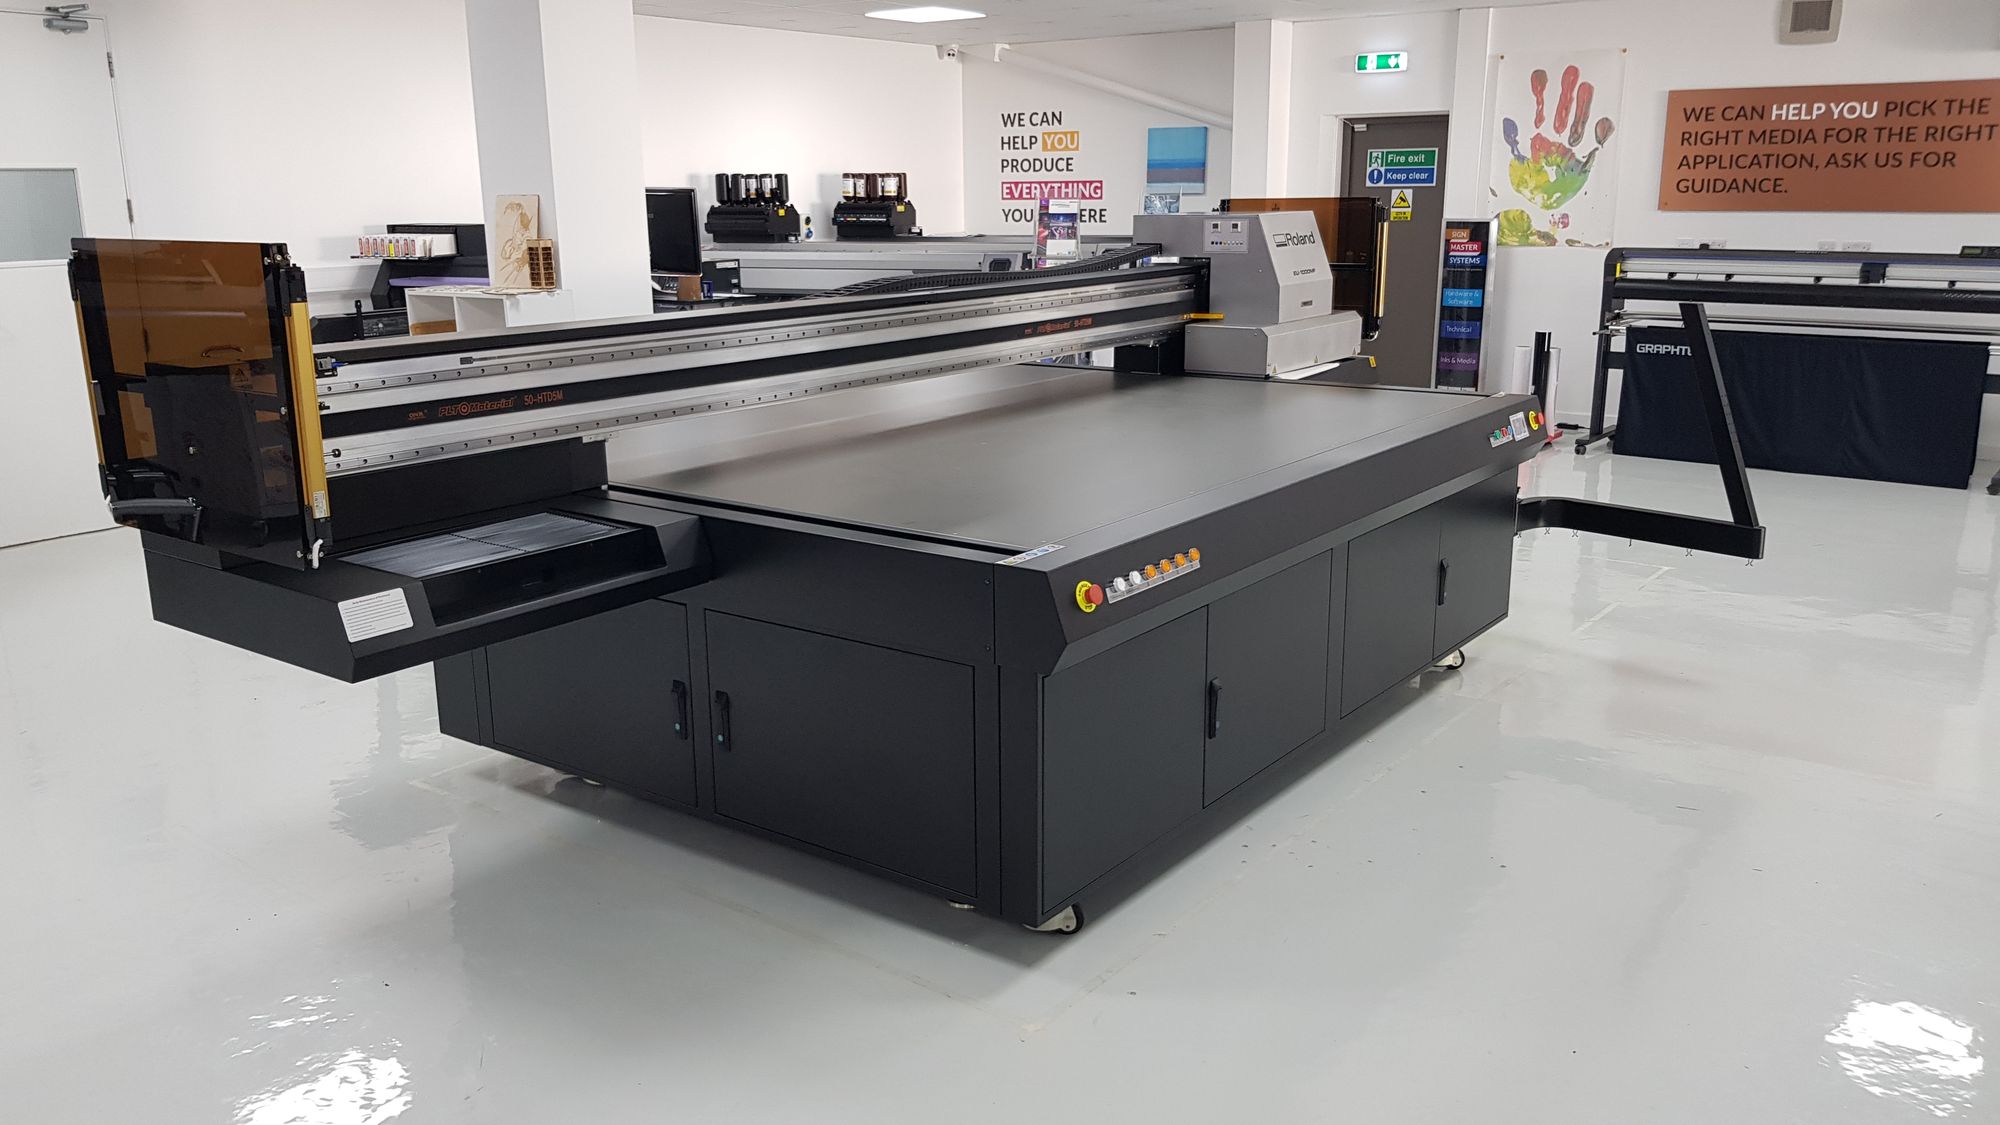 A Roland EU 1000mf Flatbed Printer which will help to boost your printing company. 